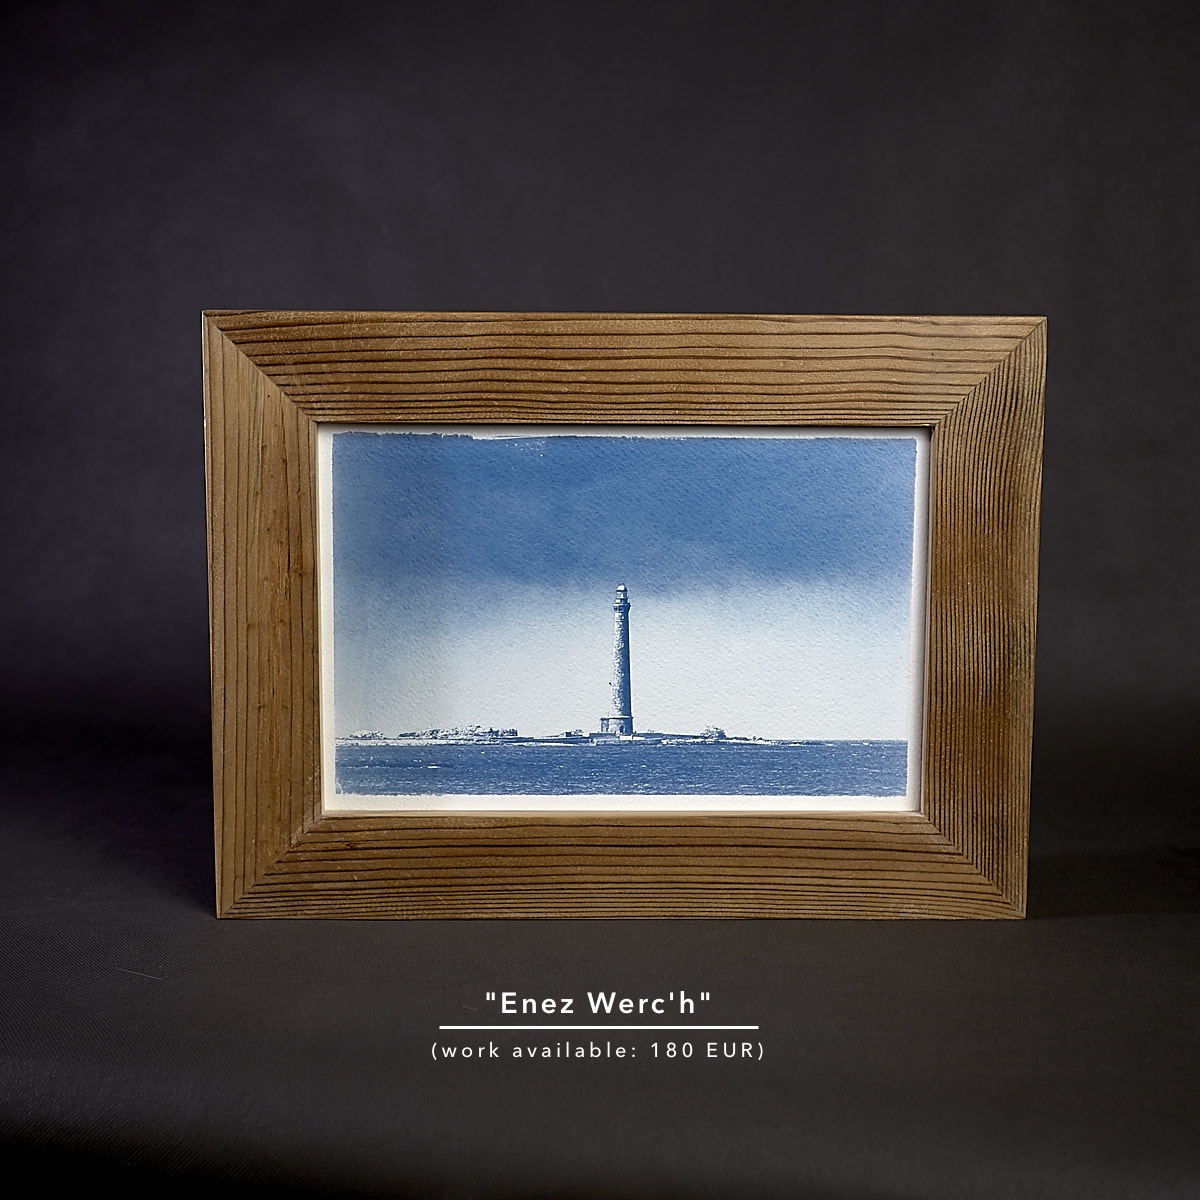 Cyanotype print on Fabriano paper in reclaimed wood frame.